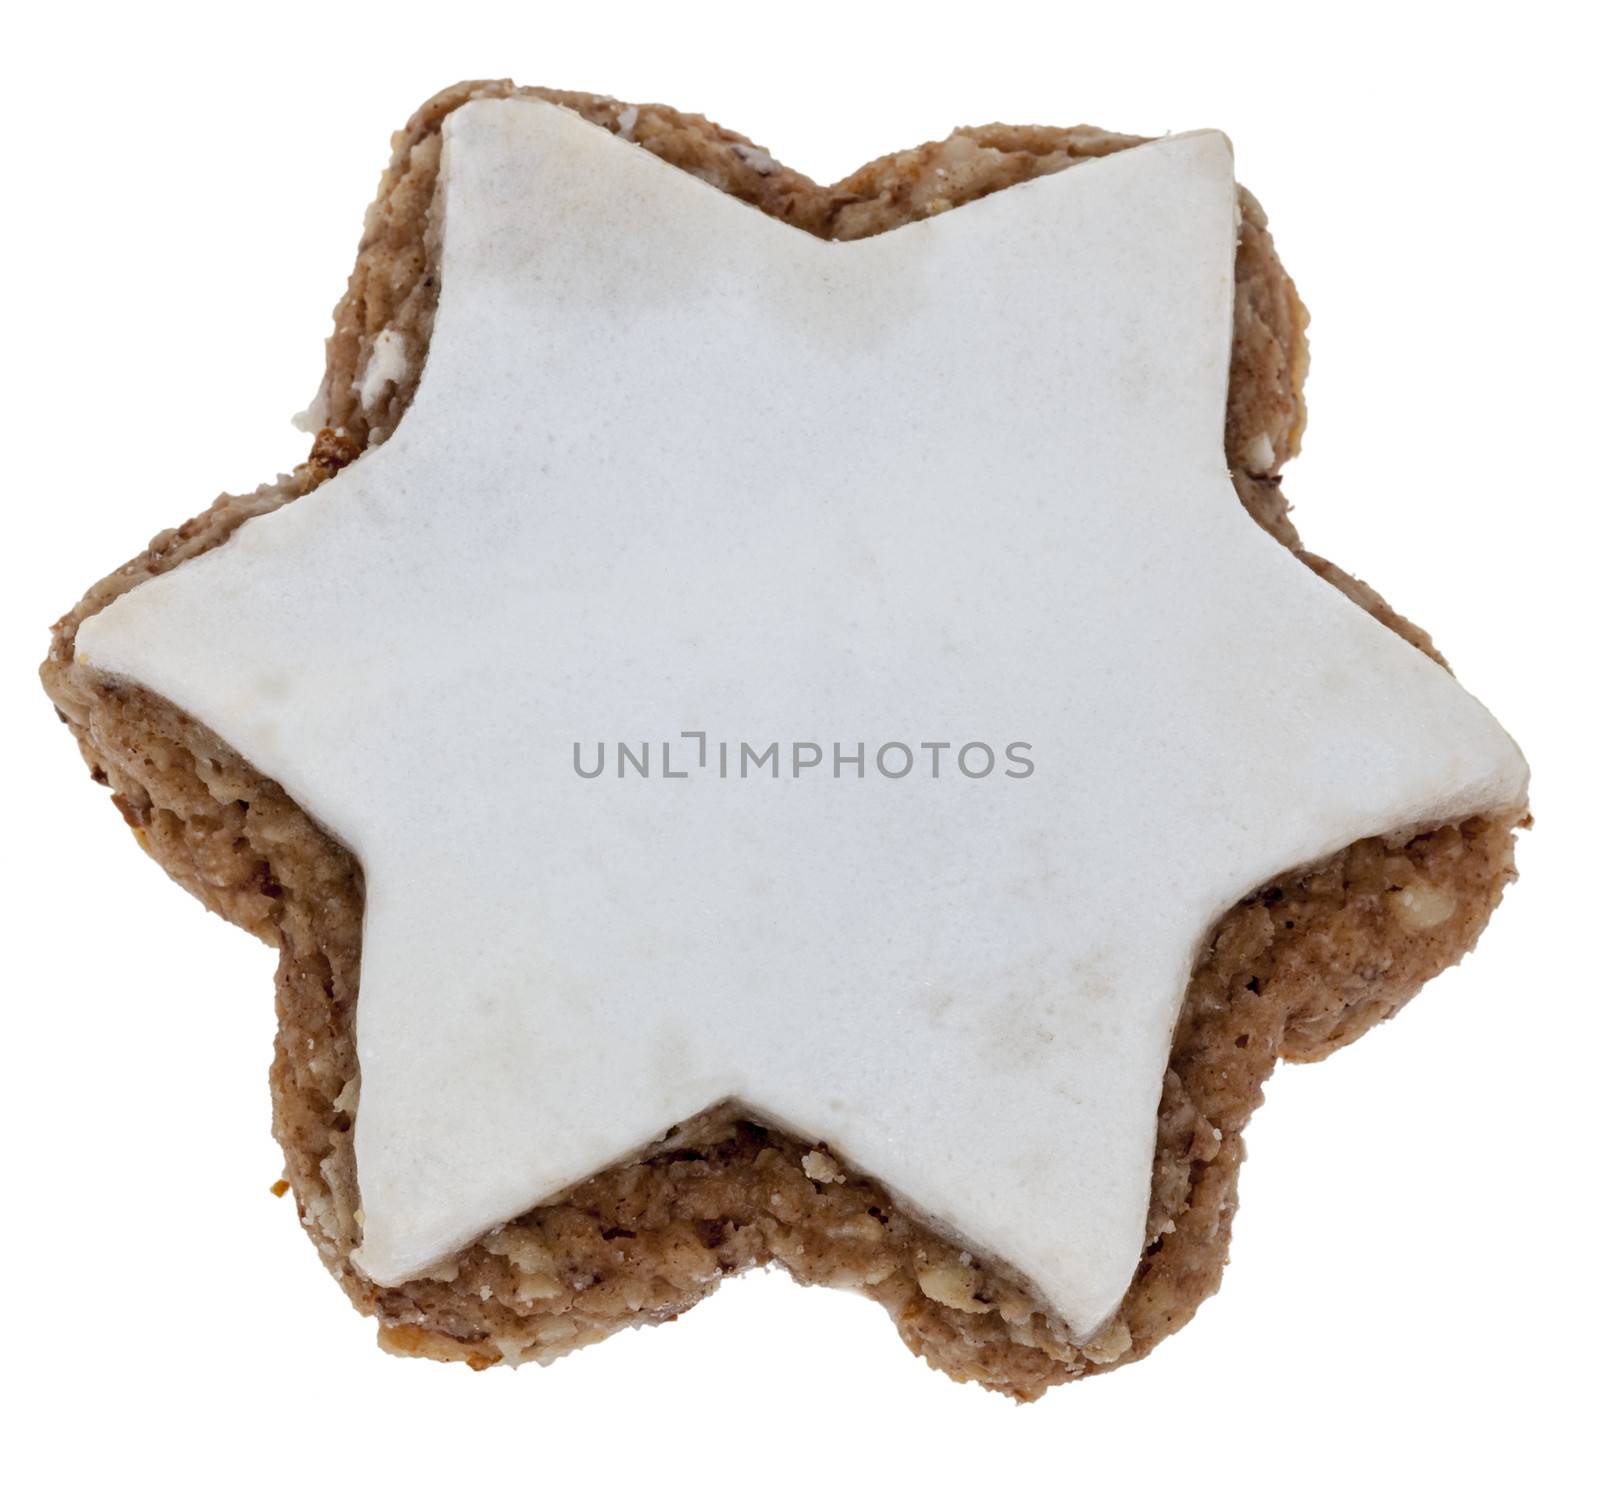 Star-Shaped Cookie by RazvanPhotography